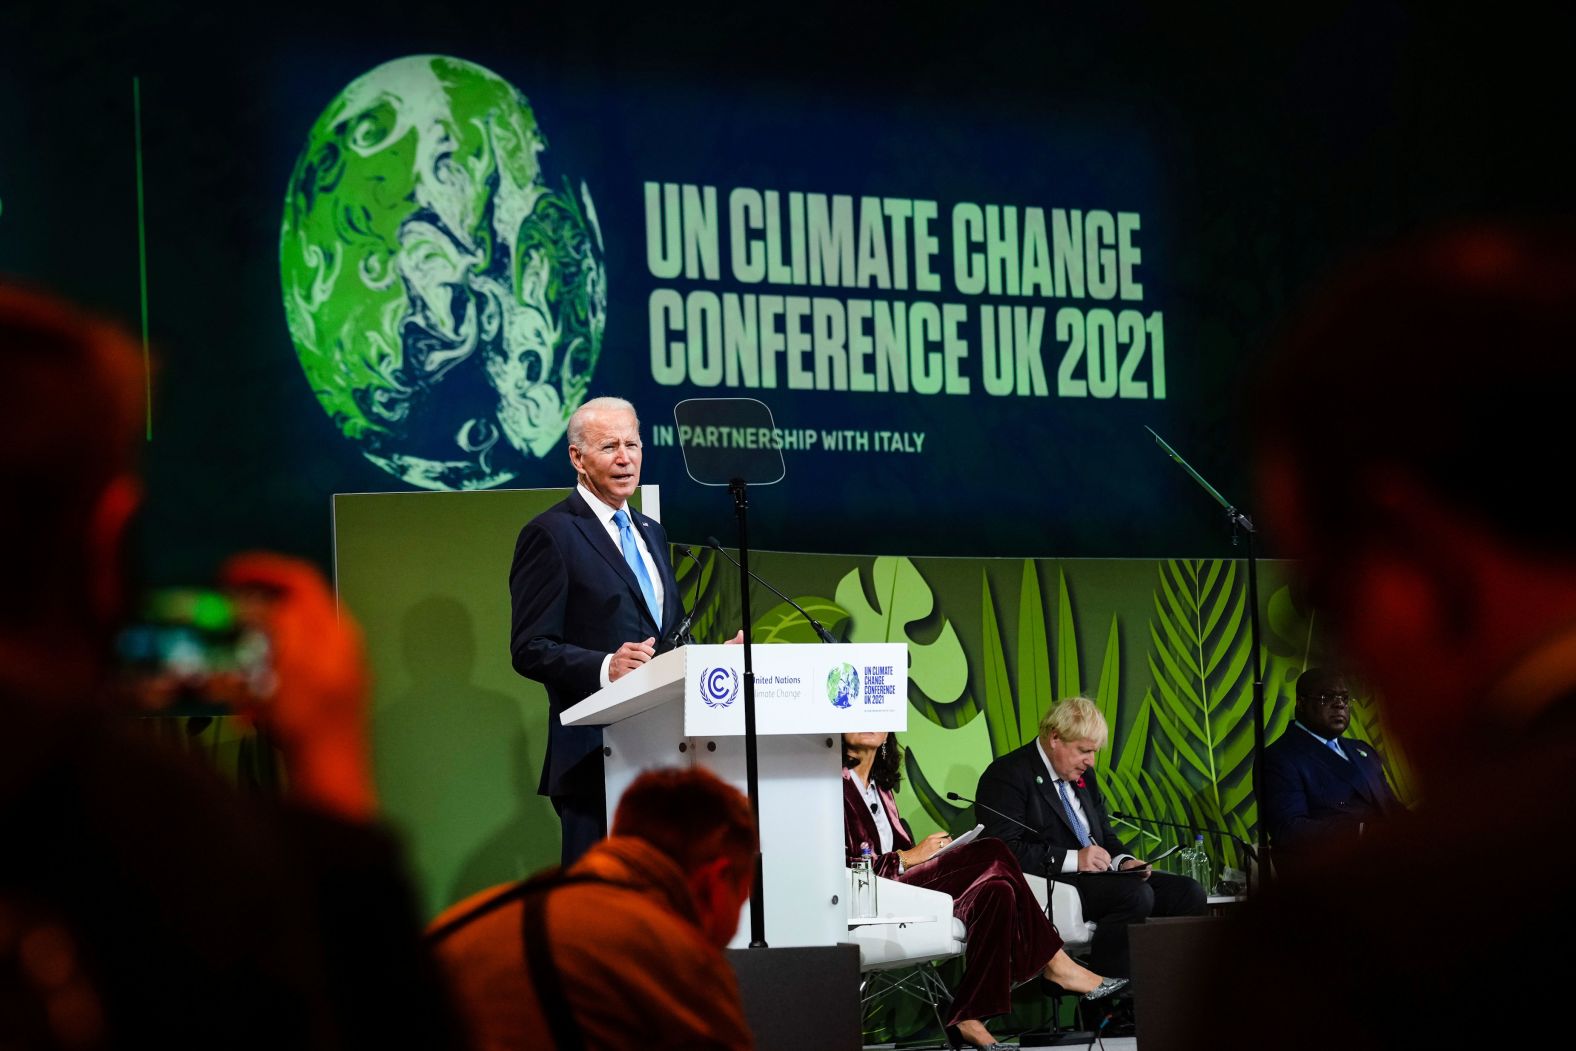 On Tuesday, Biden announced a new plan <a href="index.php?page=&url=https%3A%2F%2Fwww.cnn.com%2Fworld%2Flive-news%2Fcop26-climate-summit-11-02-21%2Fh_275253fa05665c7250283b41ff872111" target="_blank">to conserve global forests.</a> "Forests have the potential to reduce, reduce carbon globally by more than one third. By more than one third," he said. "So we need to approach this issue with the same seriousness of purpose as decarbonizing our economies. That's what we're doing in the United States."